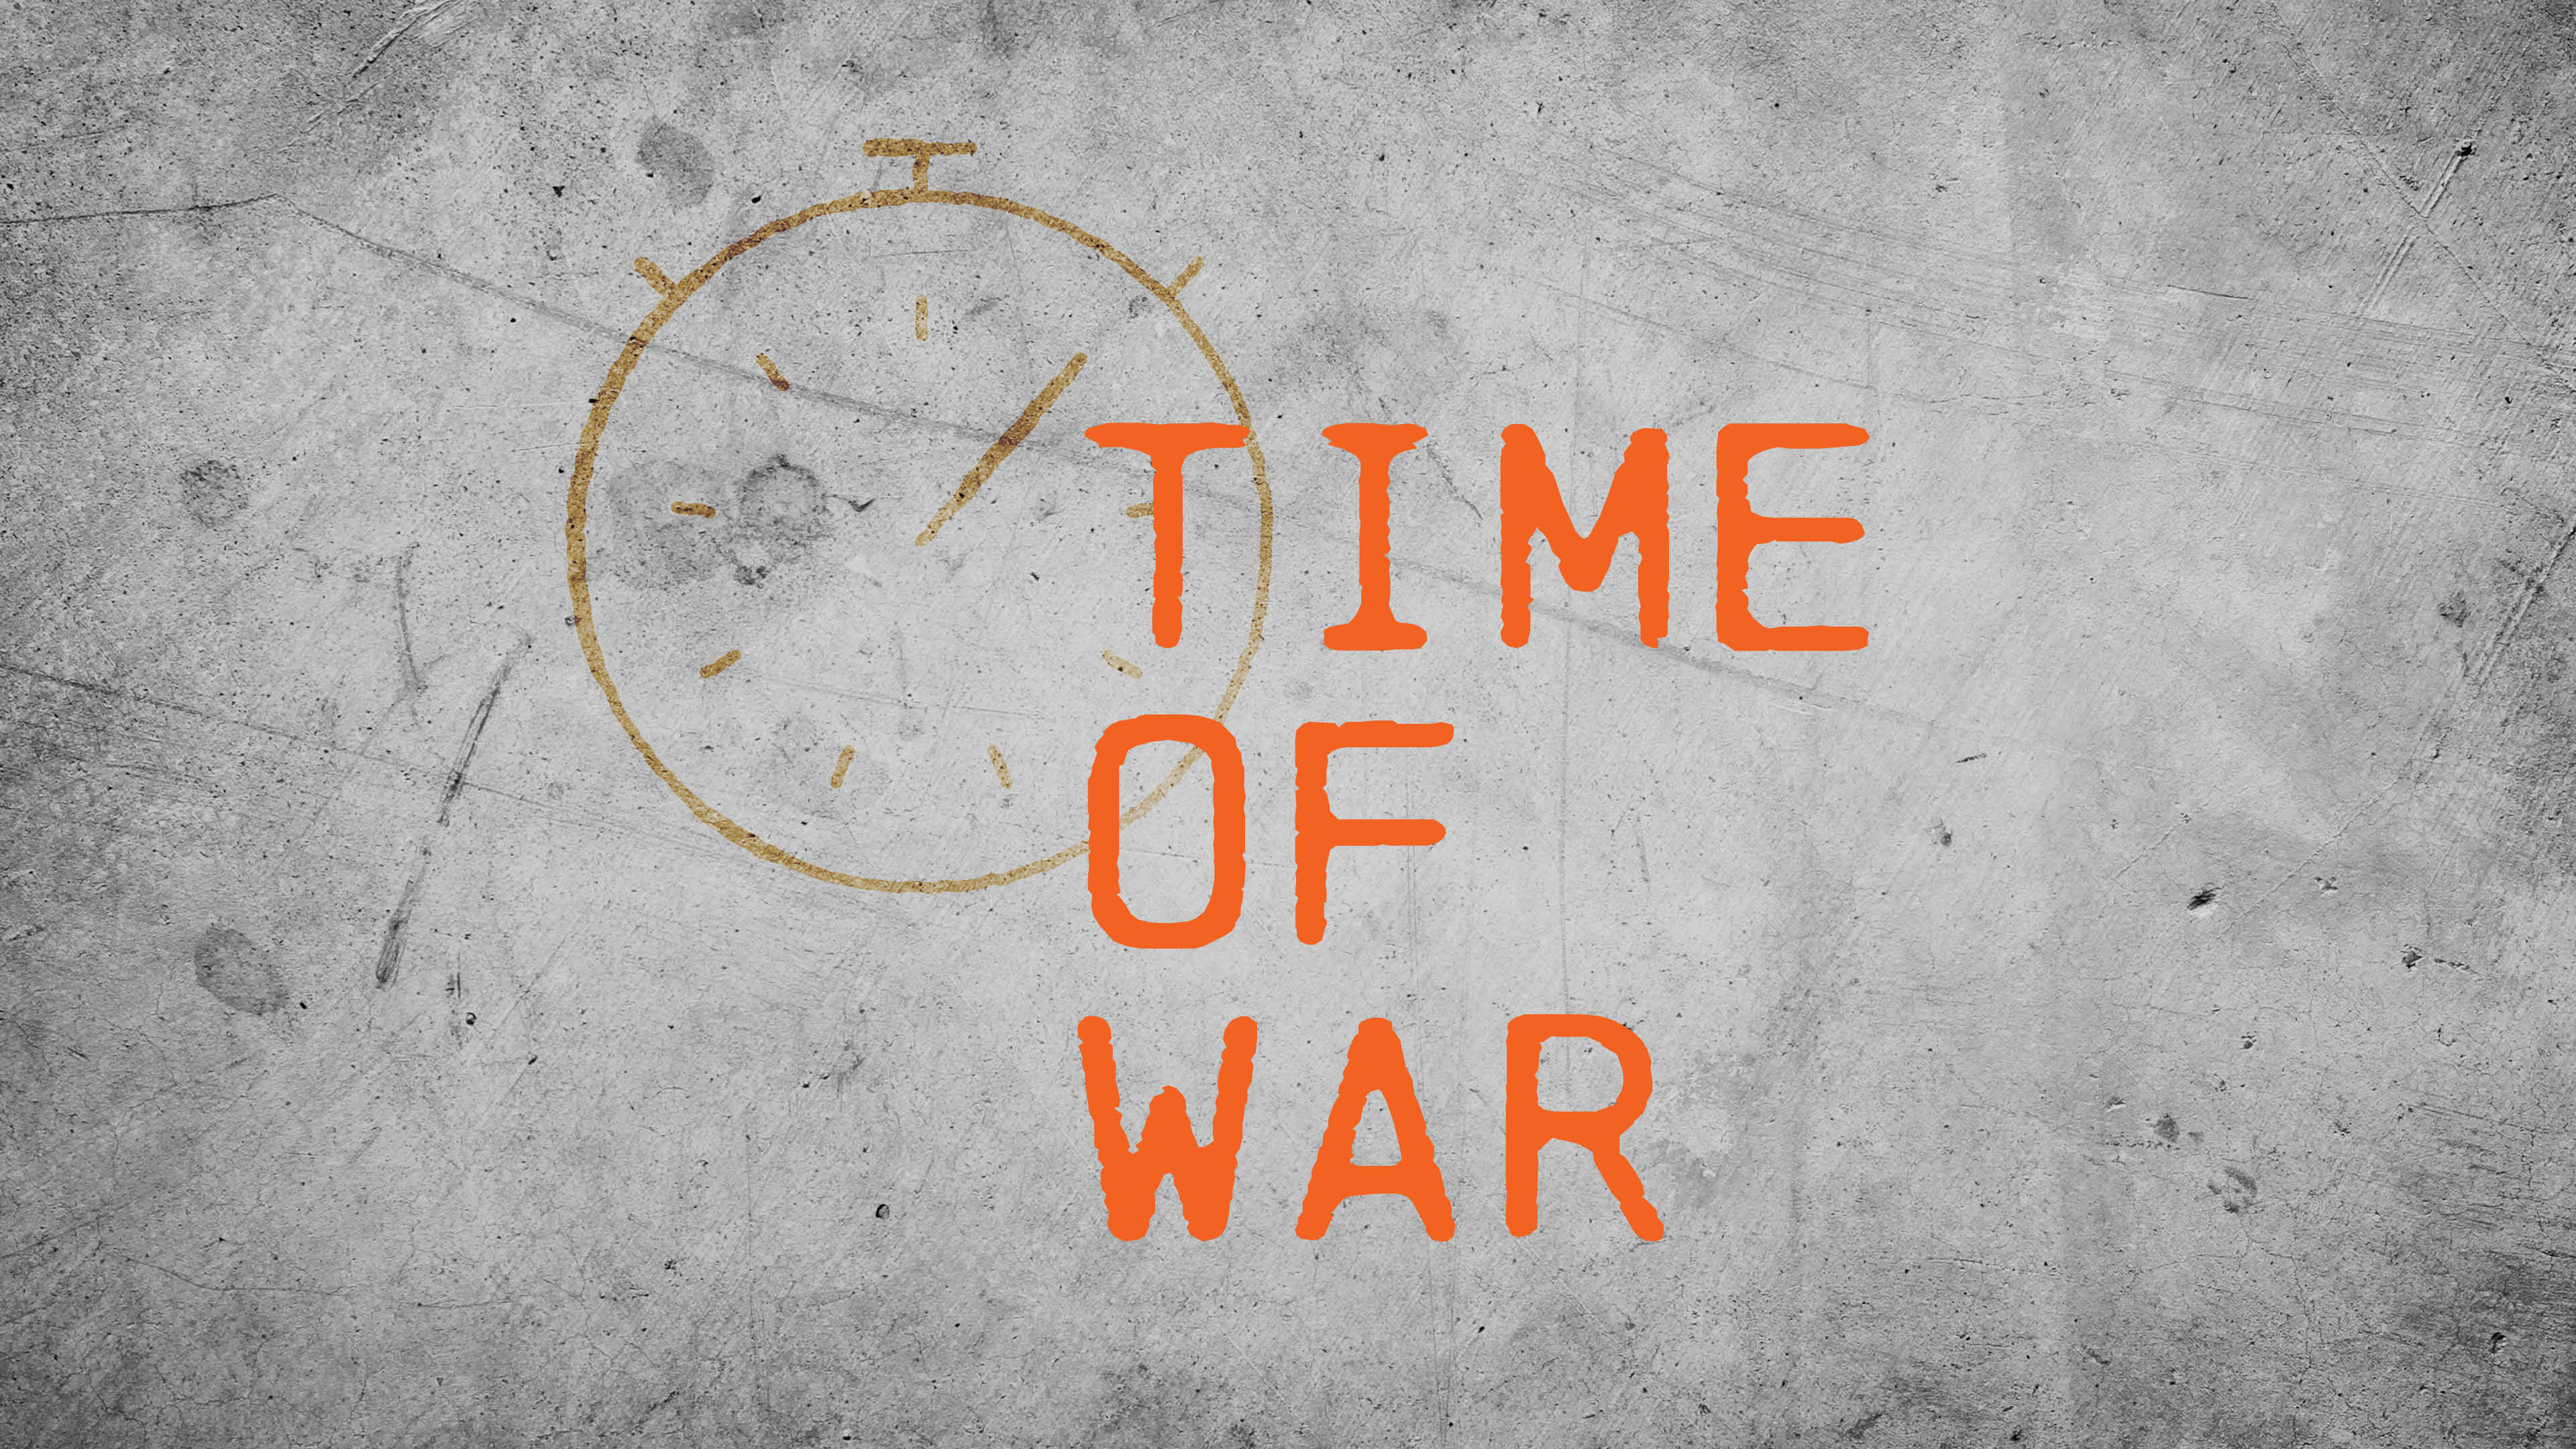 Time of War